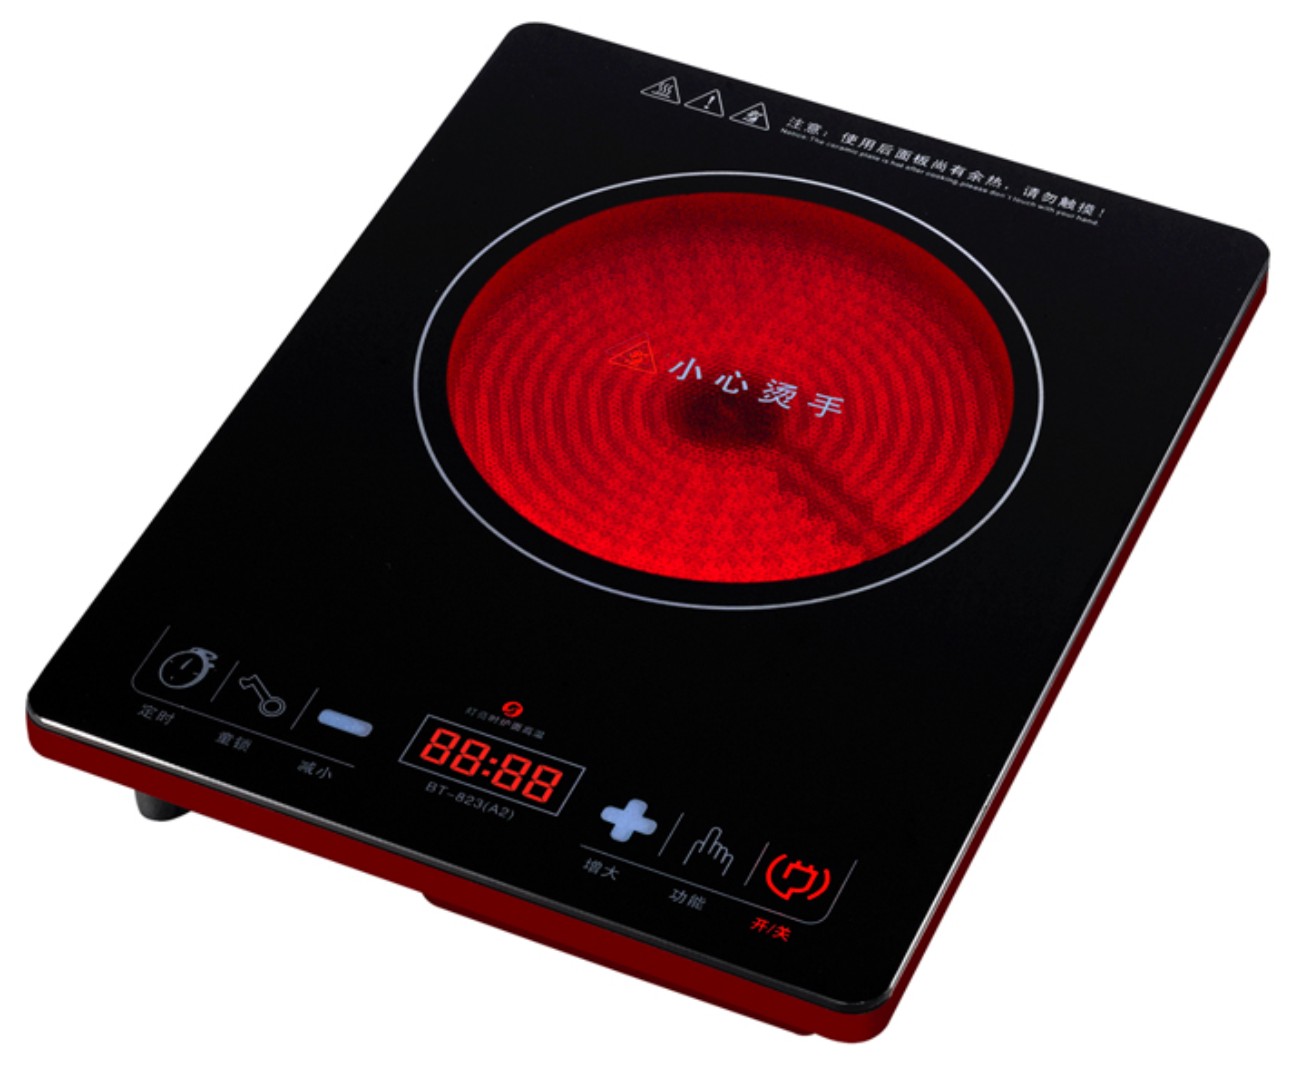 Black crystal touch control 4 digital display electric infrared ceramic cooker 